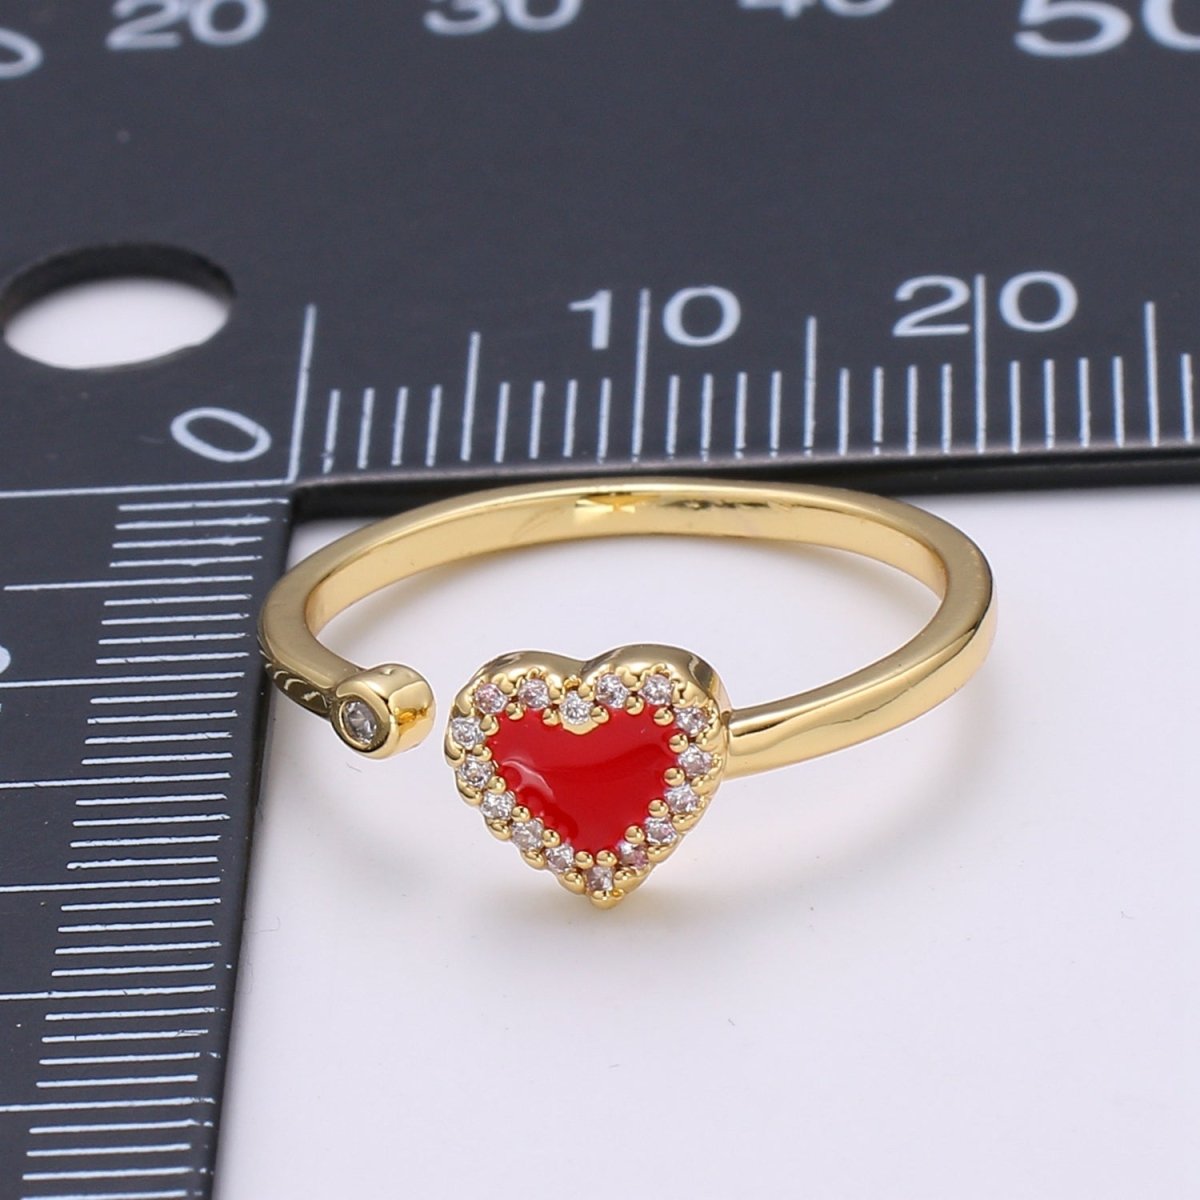 1pc 24K Gold Enamel Cubic Heart Ring, Pink Epoxy Love CZ Pendant Charm, Solitaire Cubic Zirconia Design Band For DIY Jewelry R-317,R-318 - DLUXCA